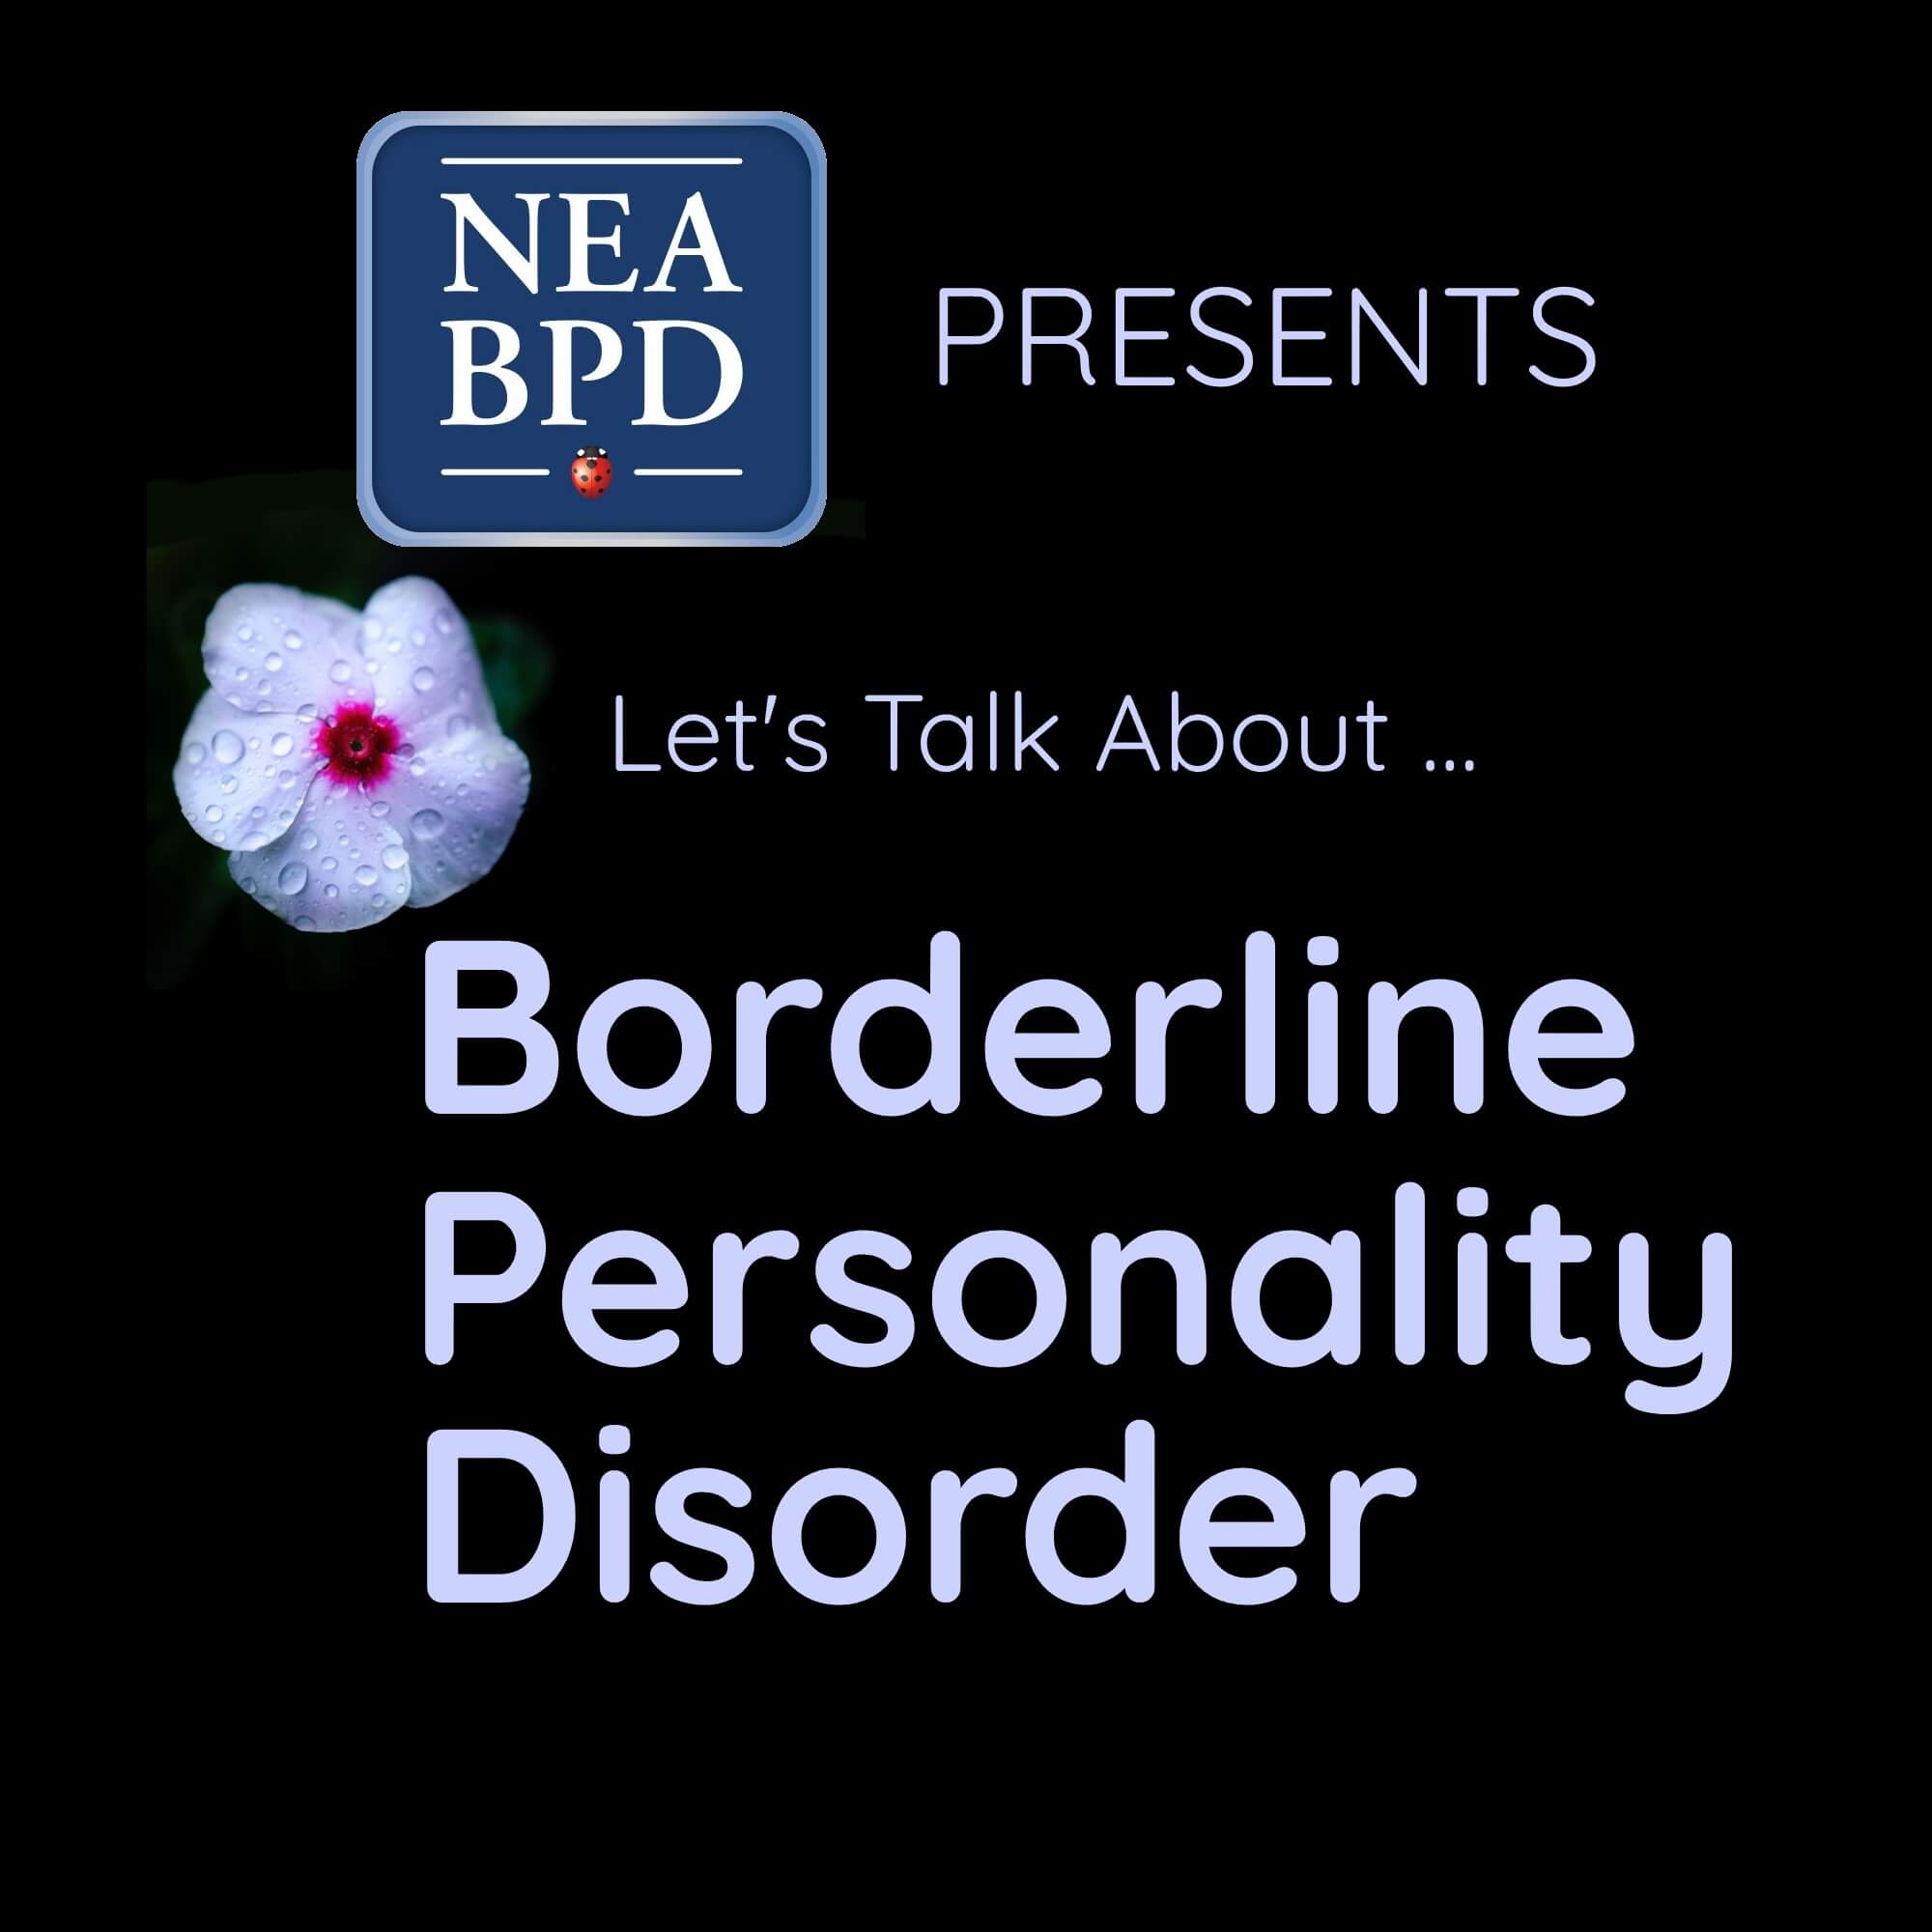 Let's Talk about Borderline Personality Disorder